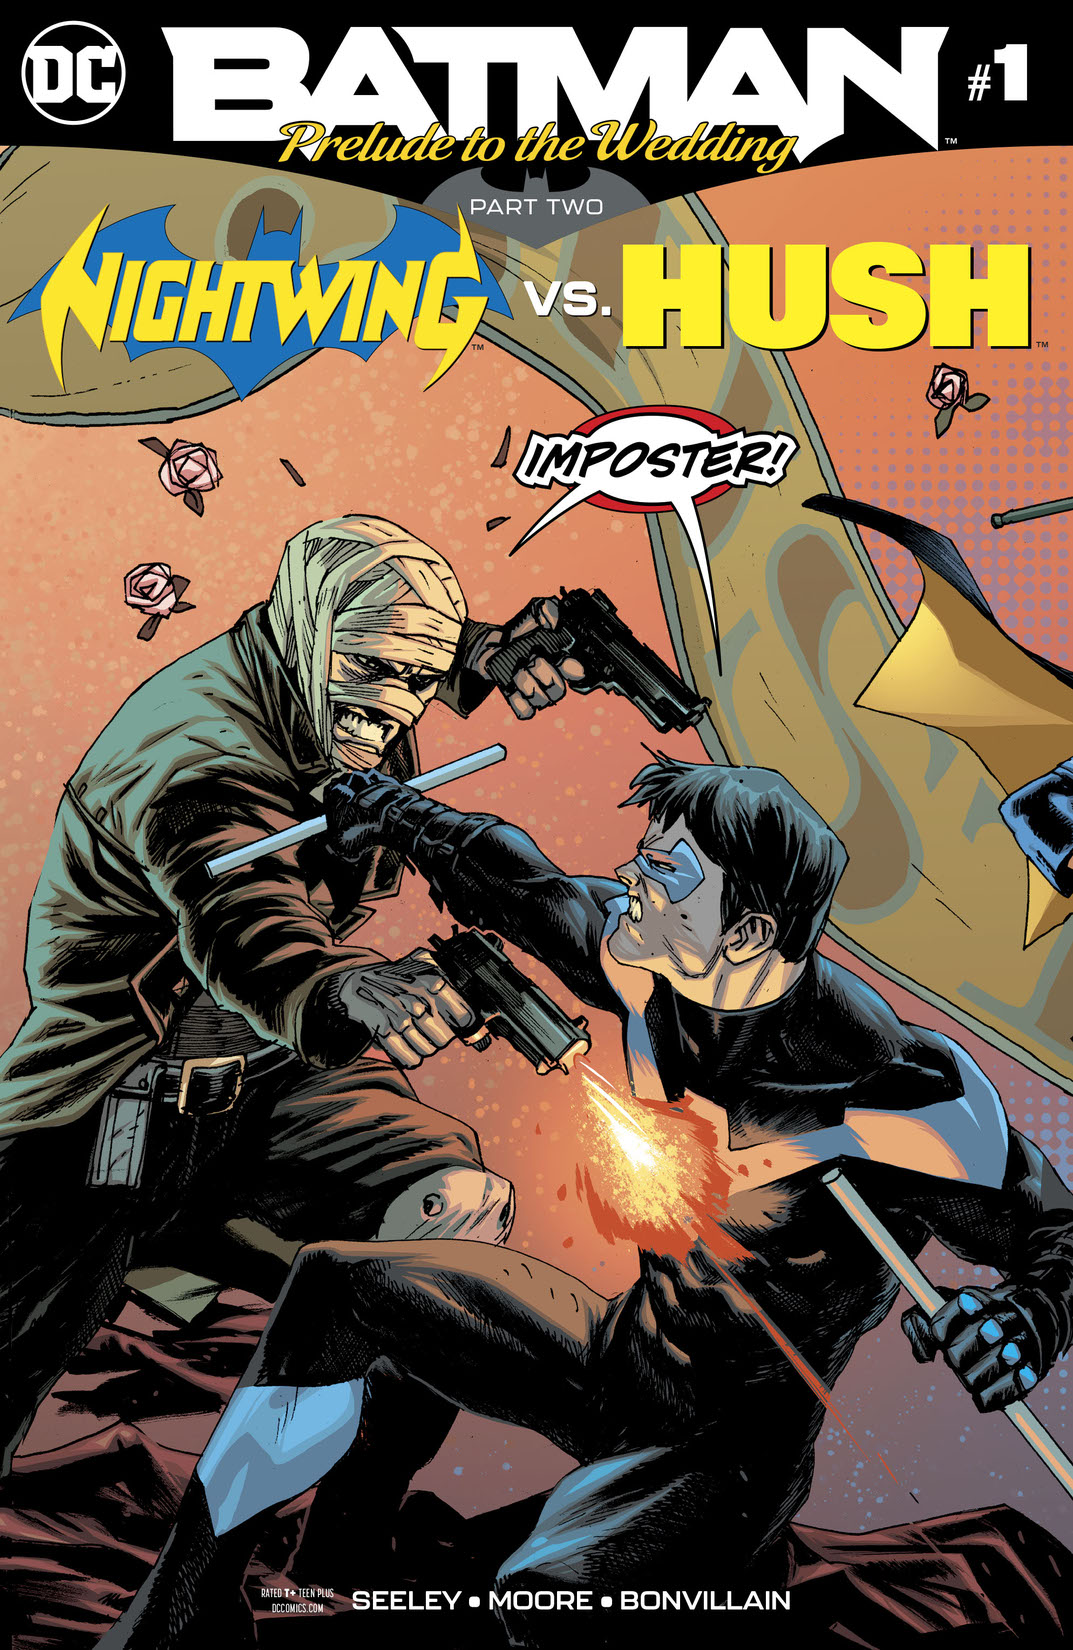 Batman: Prelude to the Wedding: Nightwing vs. Hush #1 preview images